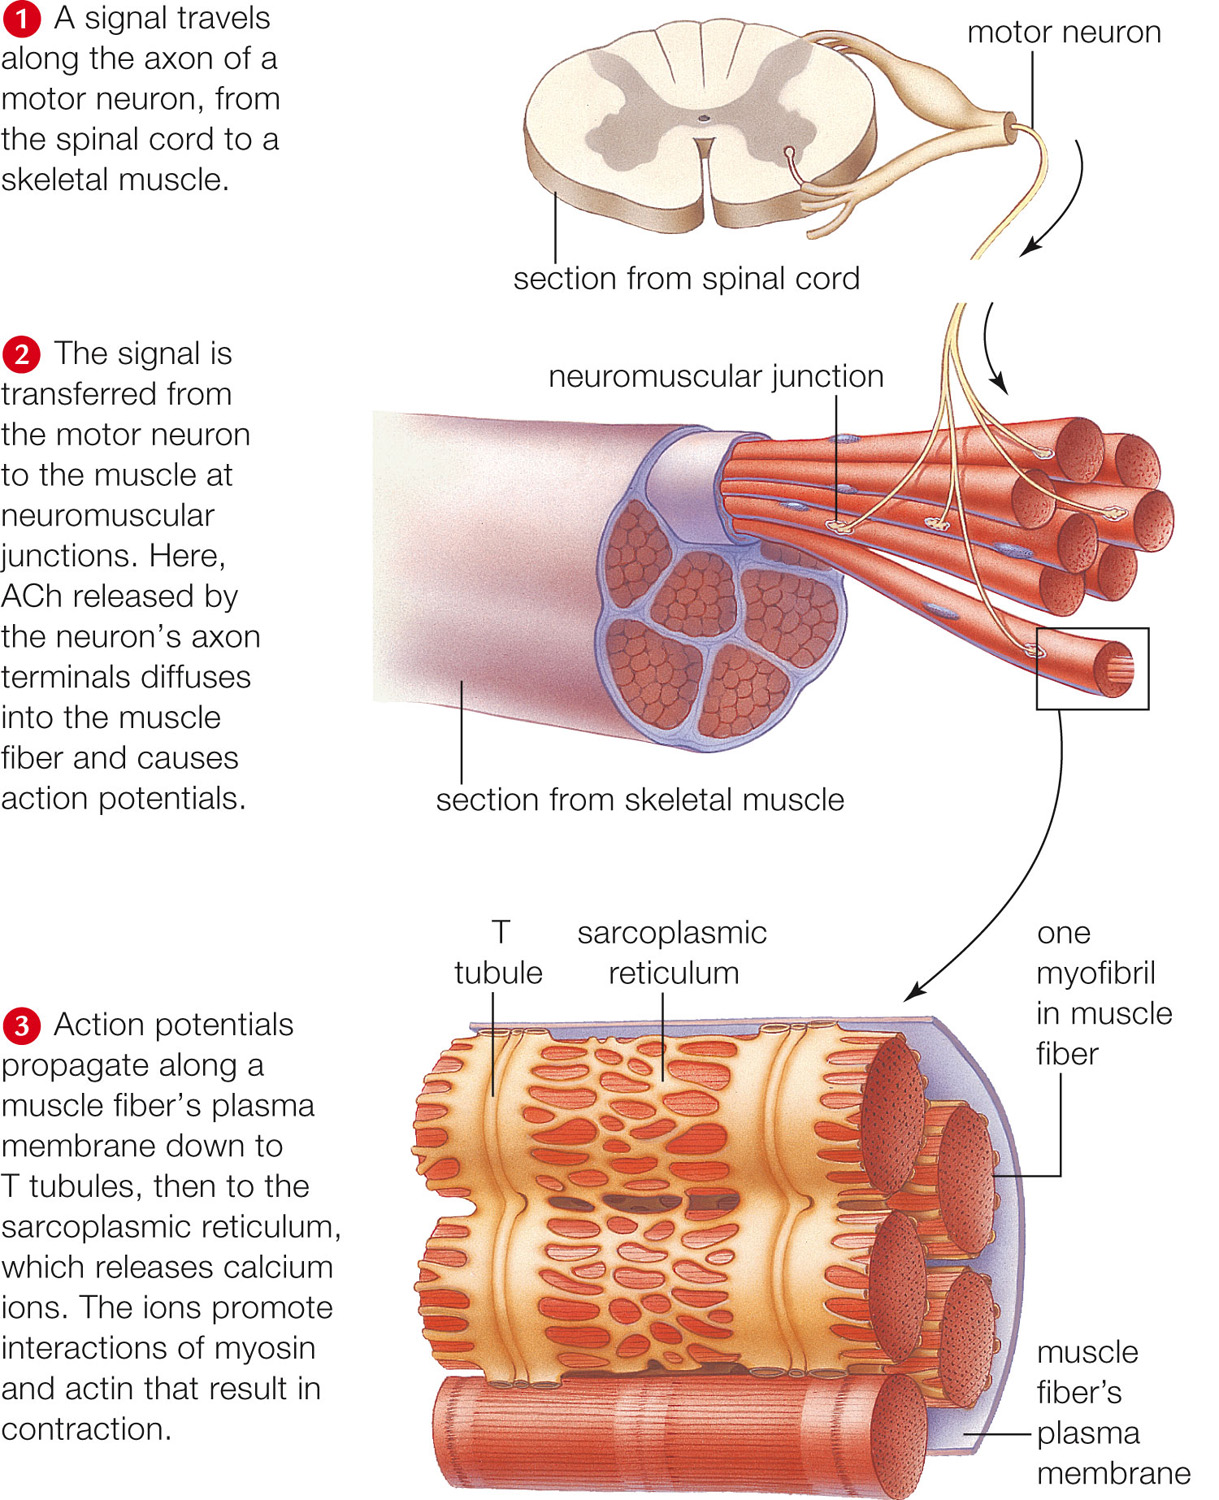 Pathway by which the nervous system controls skeletal muscle contraction